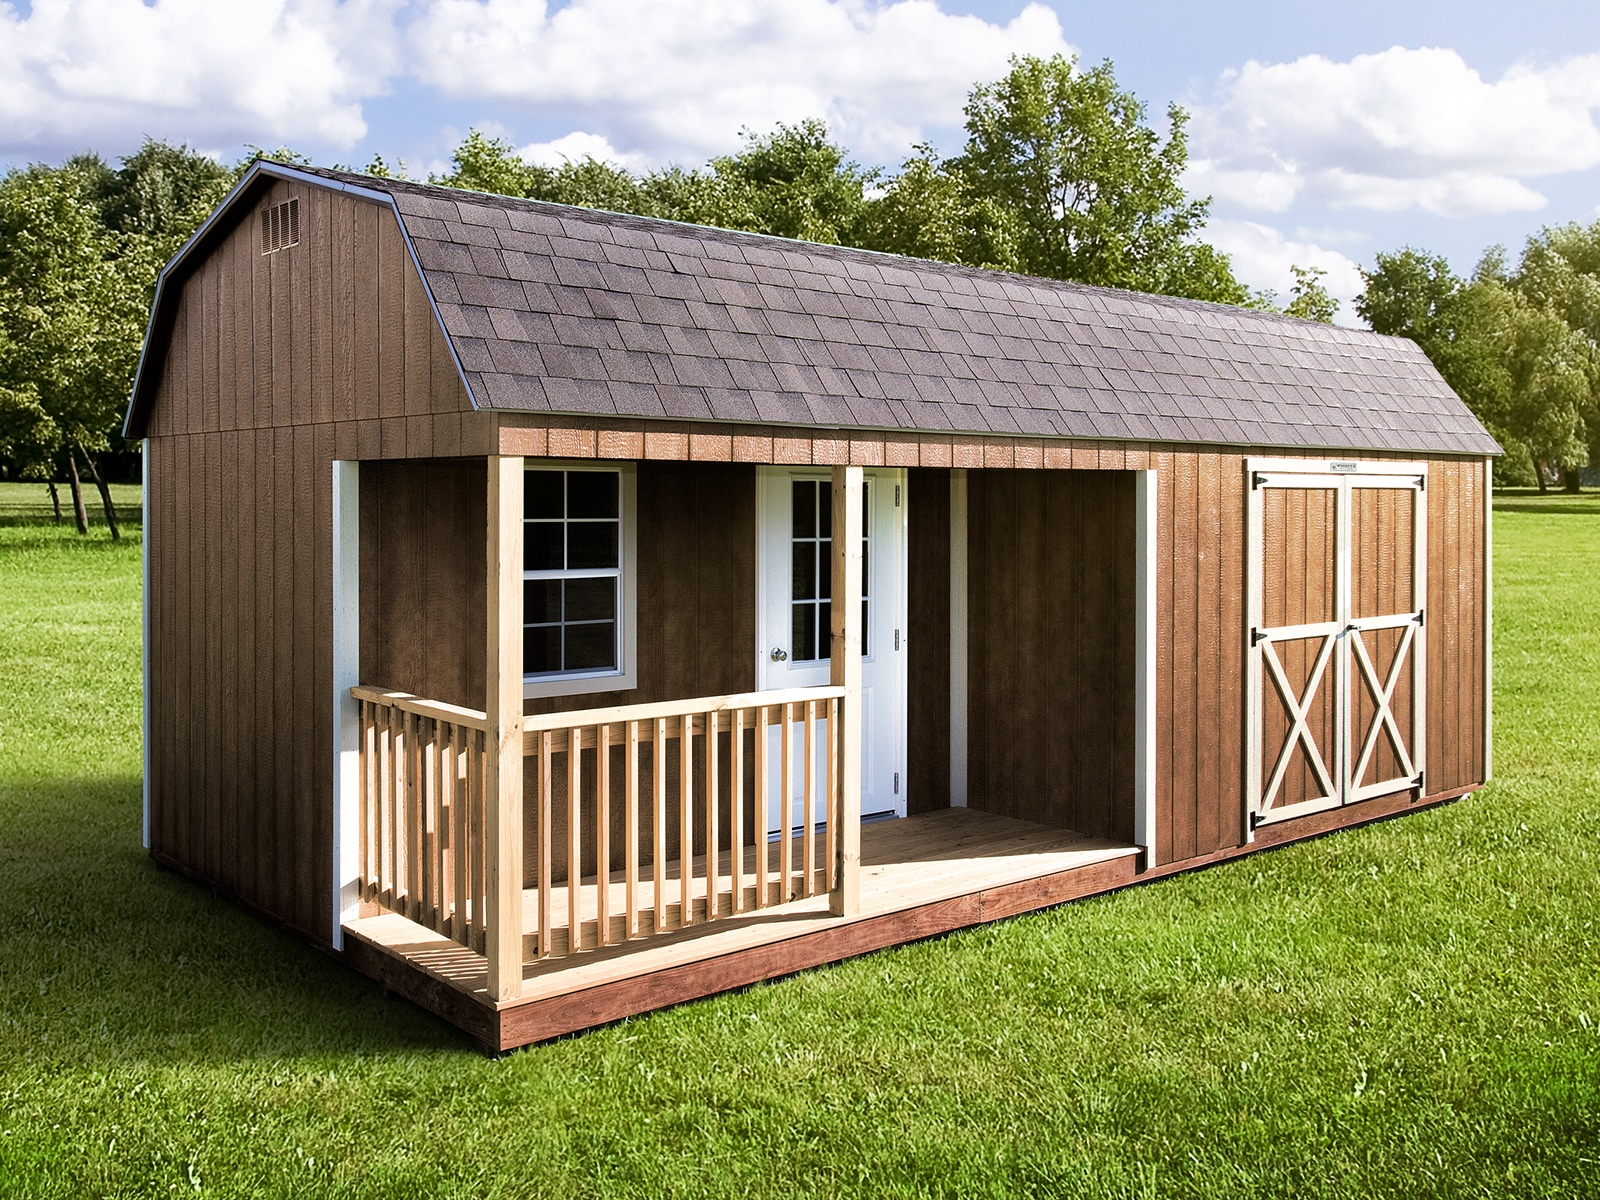 The Haven Prefab Cabin Sheds Woodtex throughout sizing 1600 X 1200